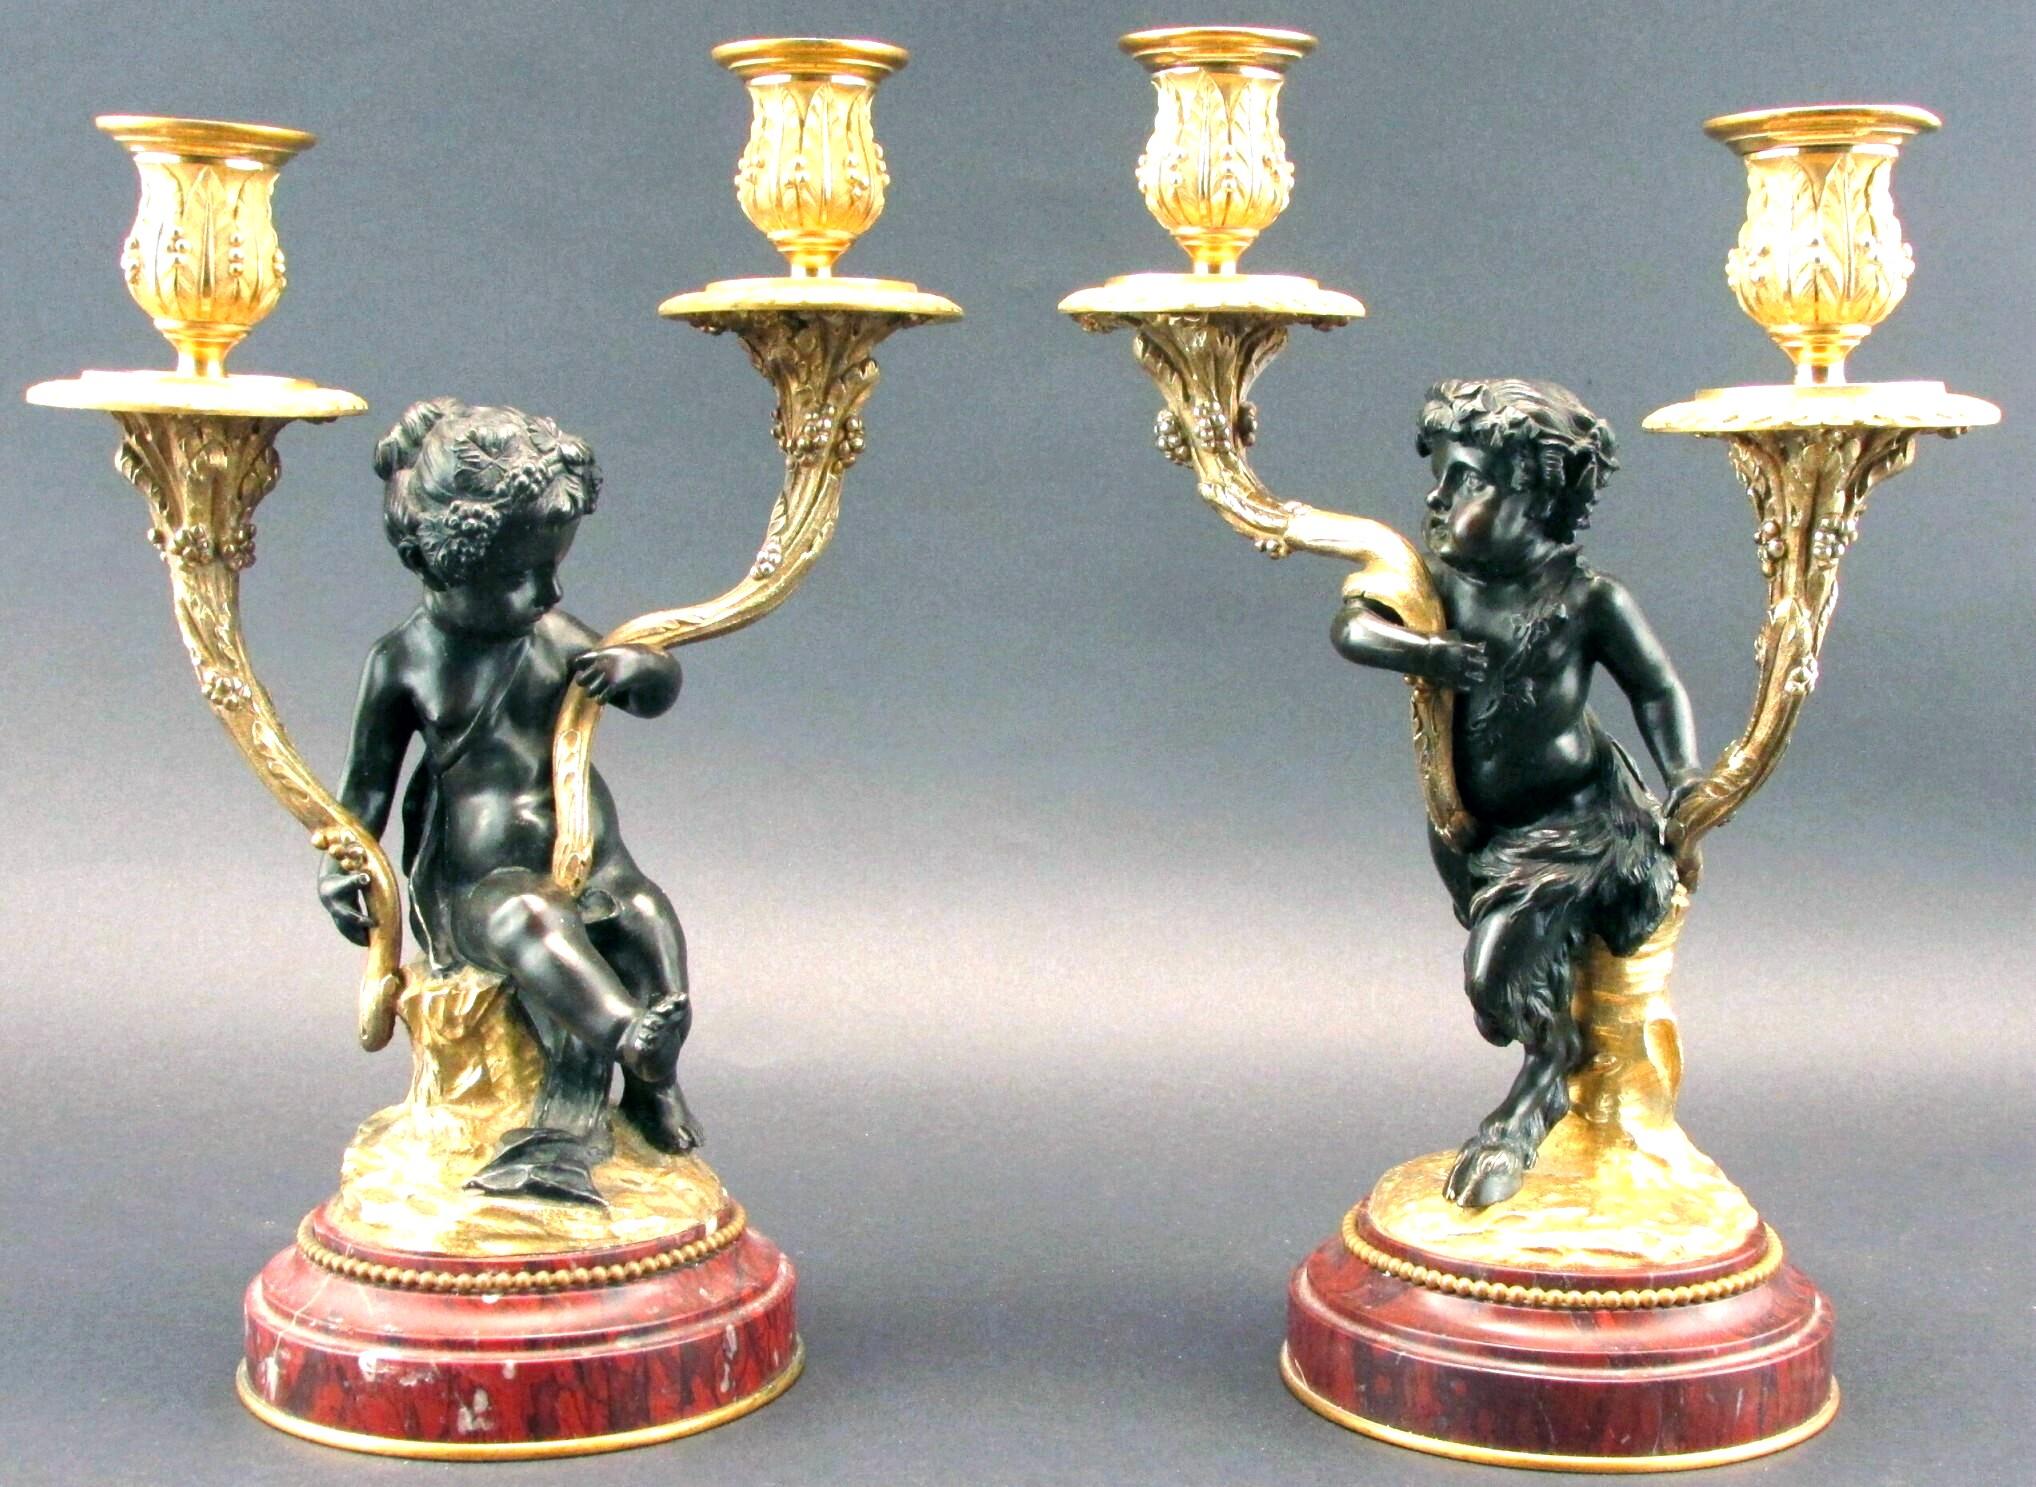 An exceptionally fine pair of 19th century patinated & parcel gilt bronze figural candelabra, executed in the Rococo manner closely associated with works by Claude Michel (Clodion) 1738-1814. 
Showing finely sculpted & patinated bronze figures of a